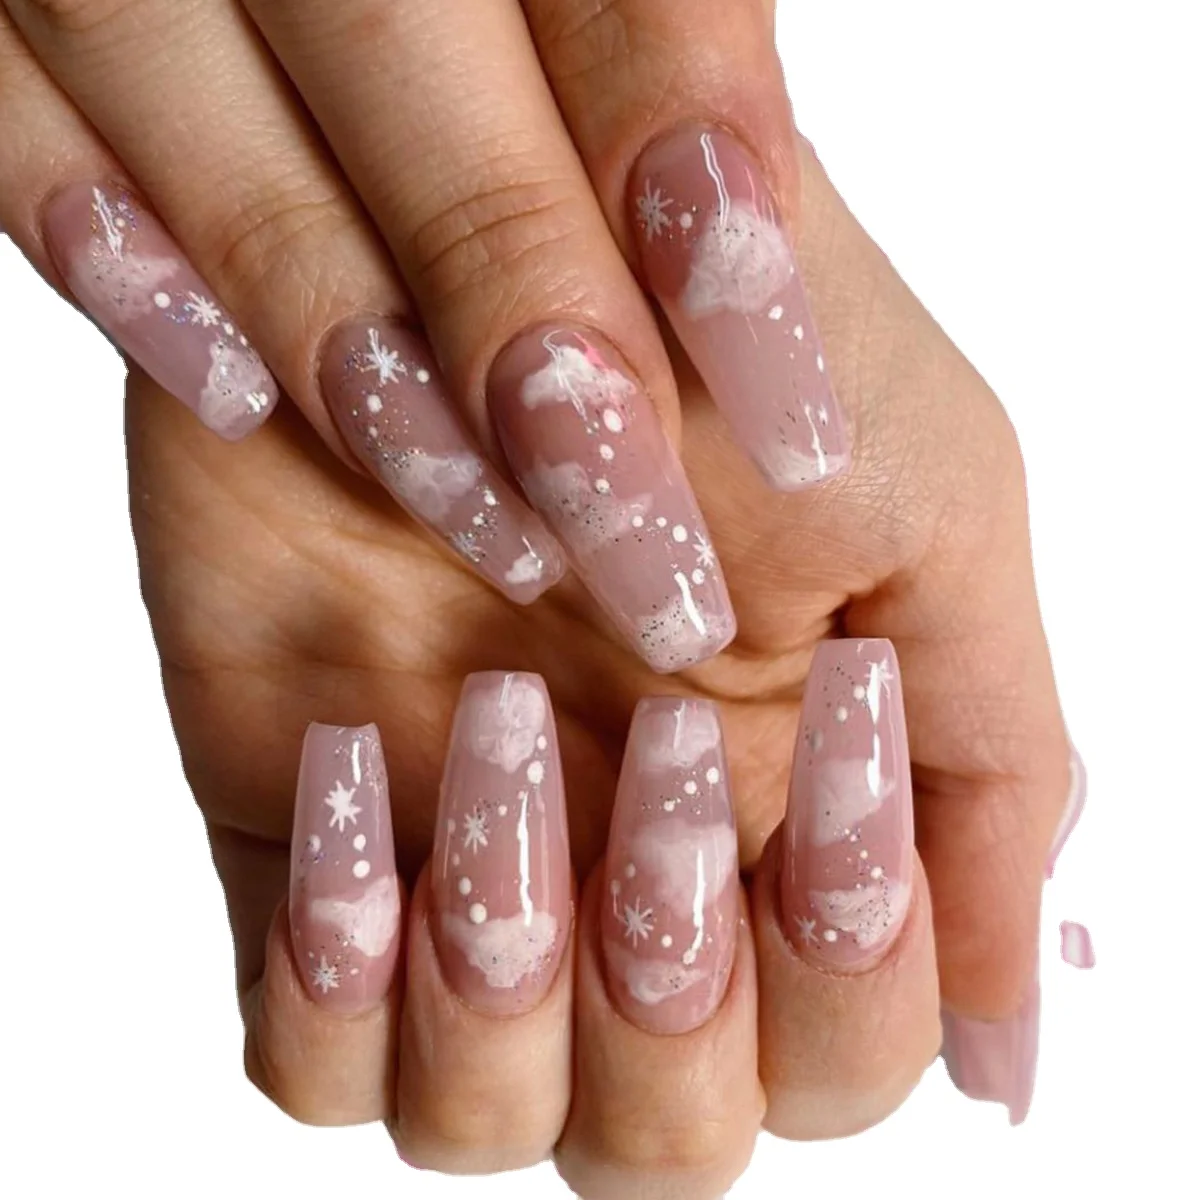 

Waterproof Long Ballet Naked Color Transparent Pink Cloud Fake Nail Manicure Press On Nails Detachable Nail Tips, As image show